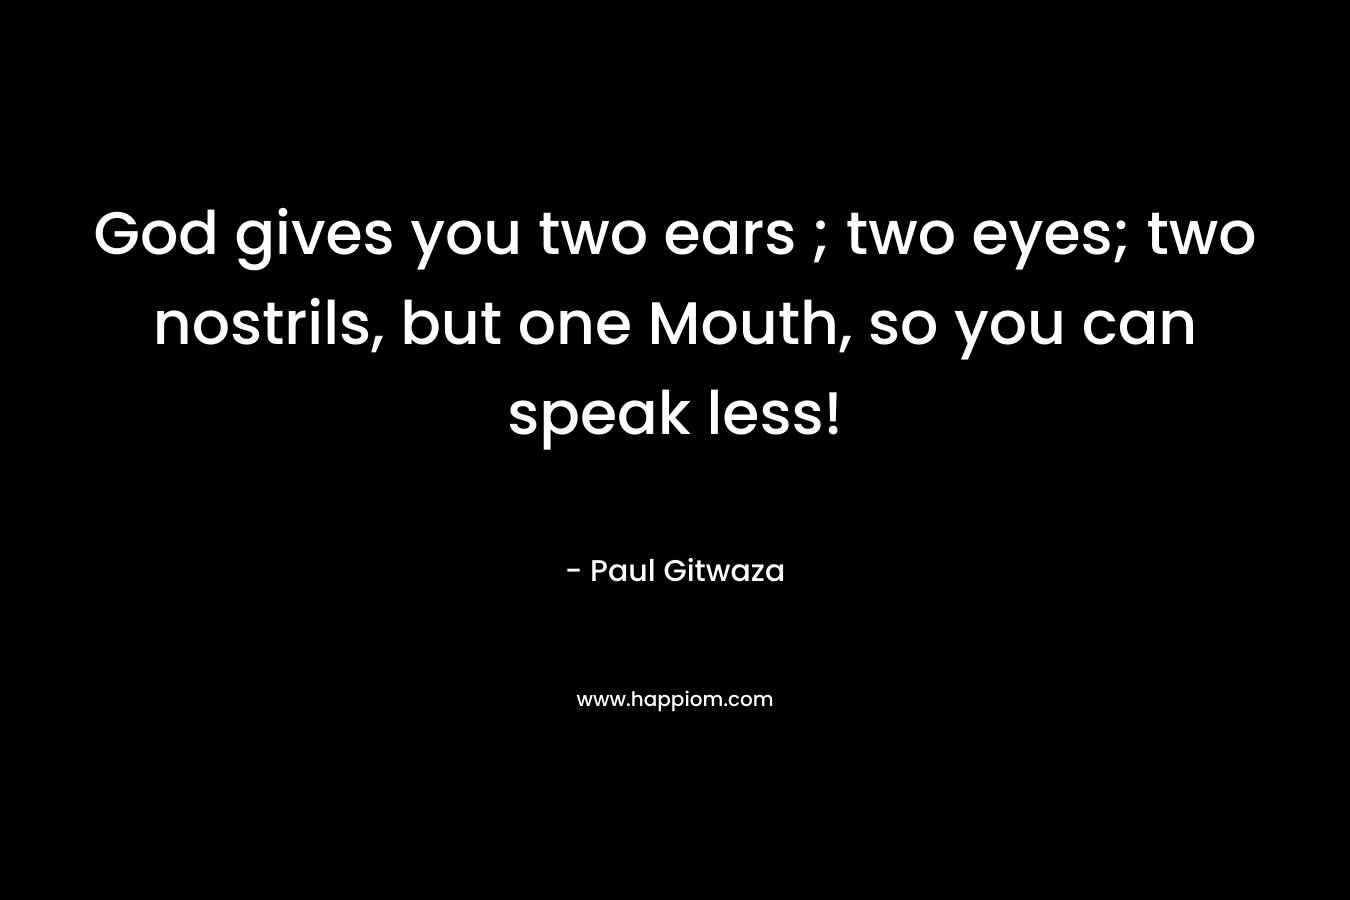 God gives you two ears ; two eyes; two nostrils, but one Mouth, so you can speak less! – Paul Gitwaza